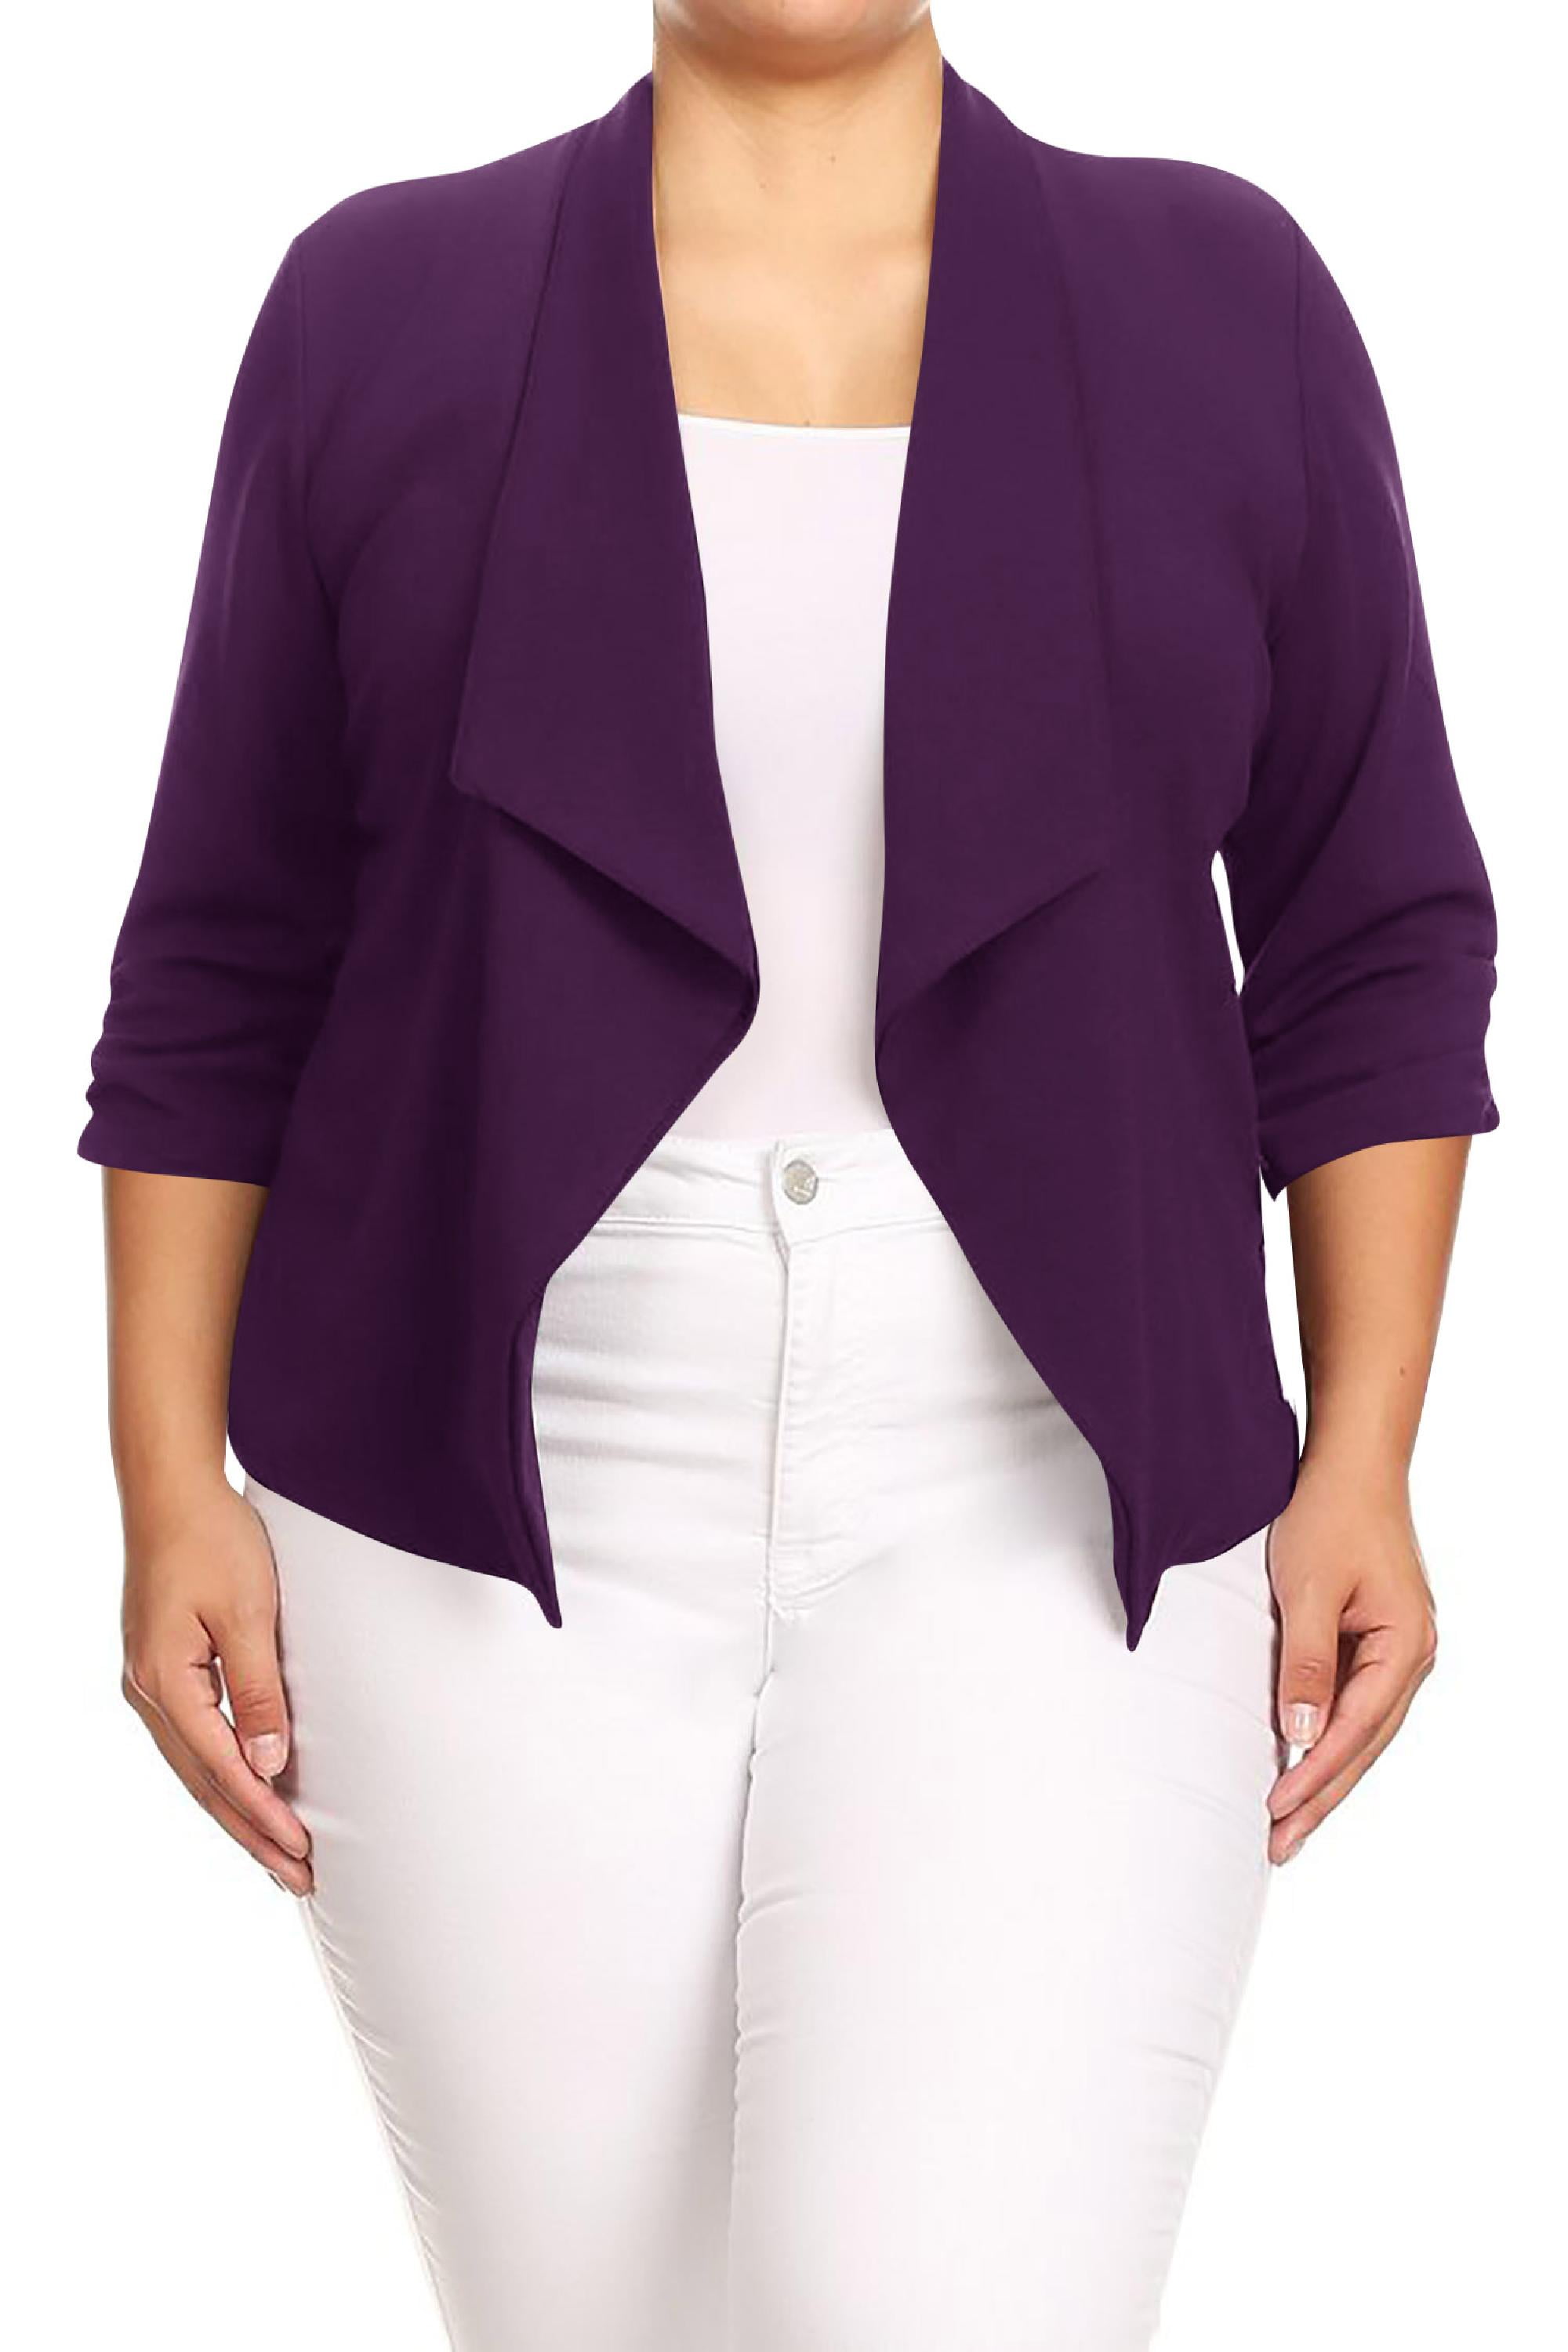 Women's Casual 3/4 Sleeve Open Front Cardigan Jacket Work Office Blazer with Plus Size 